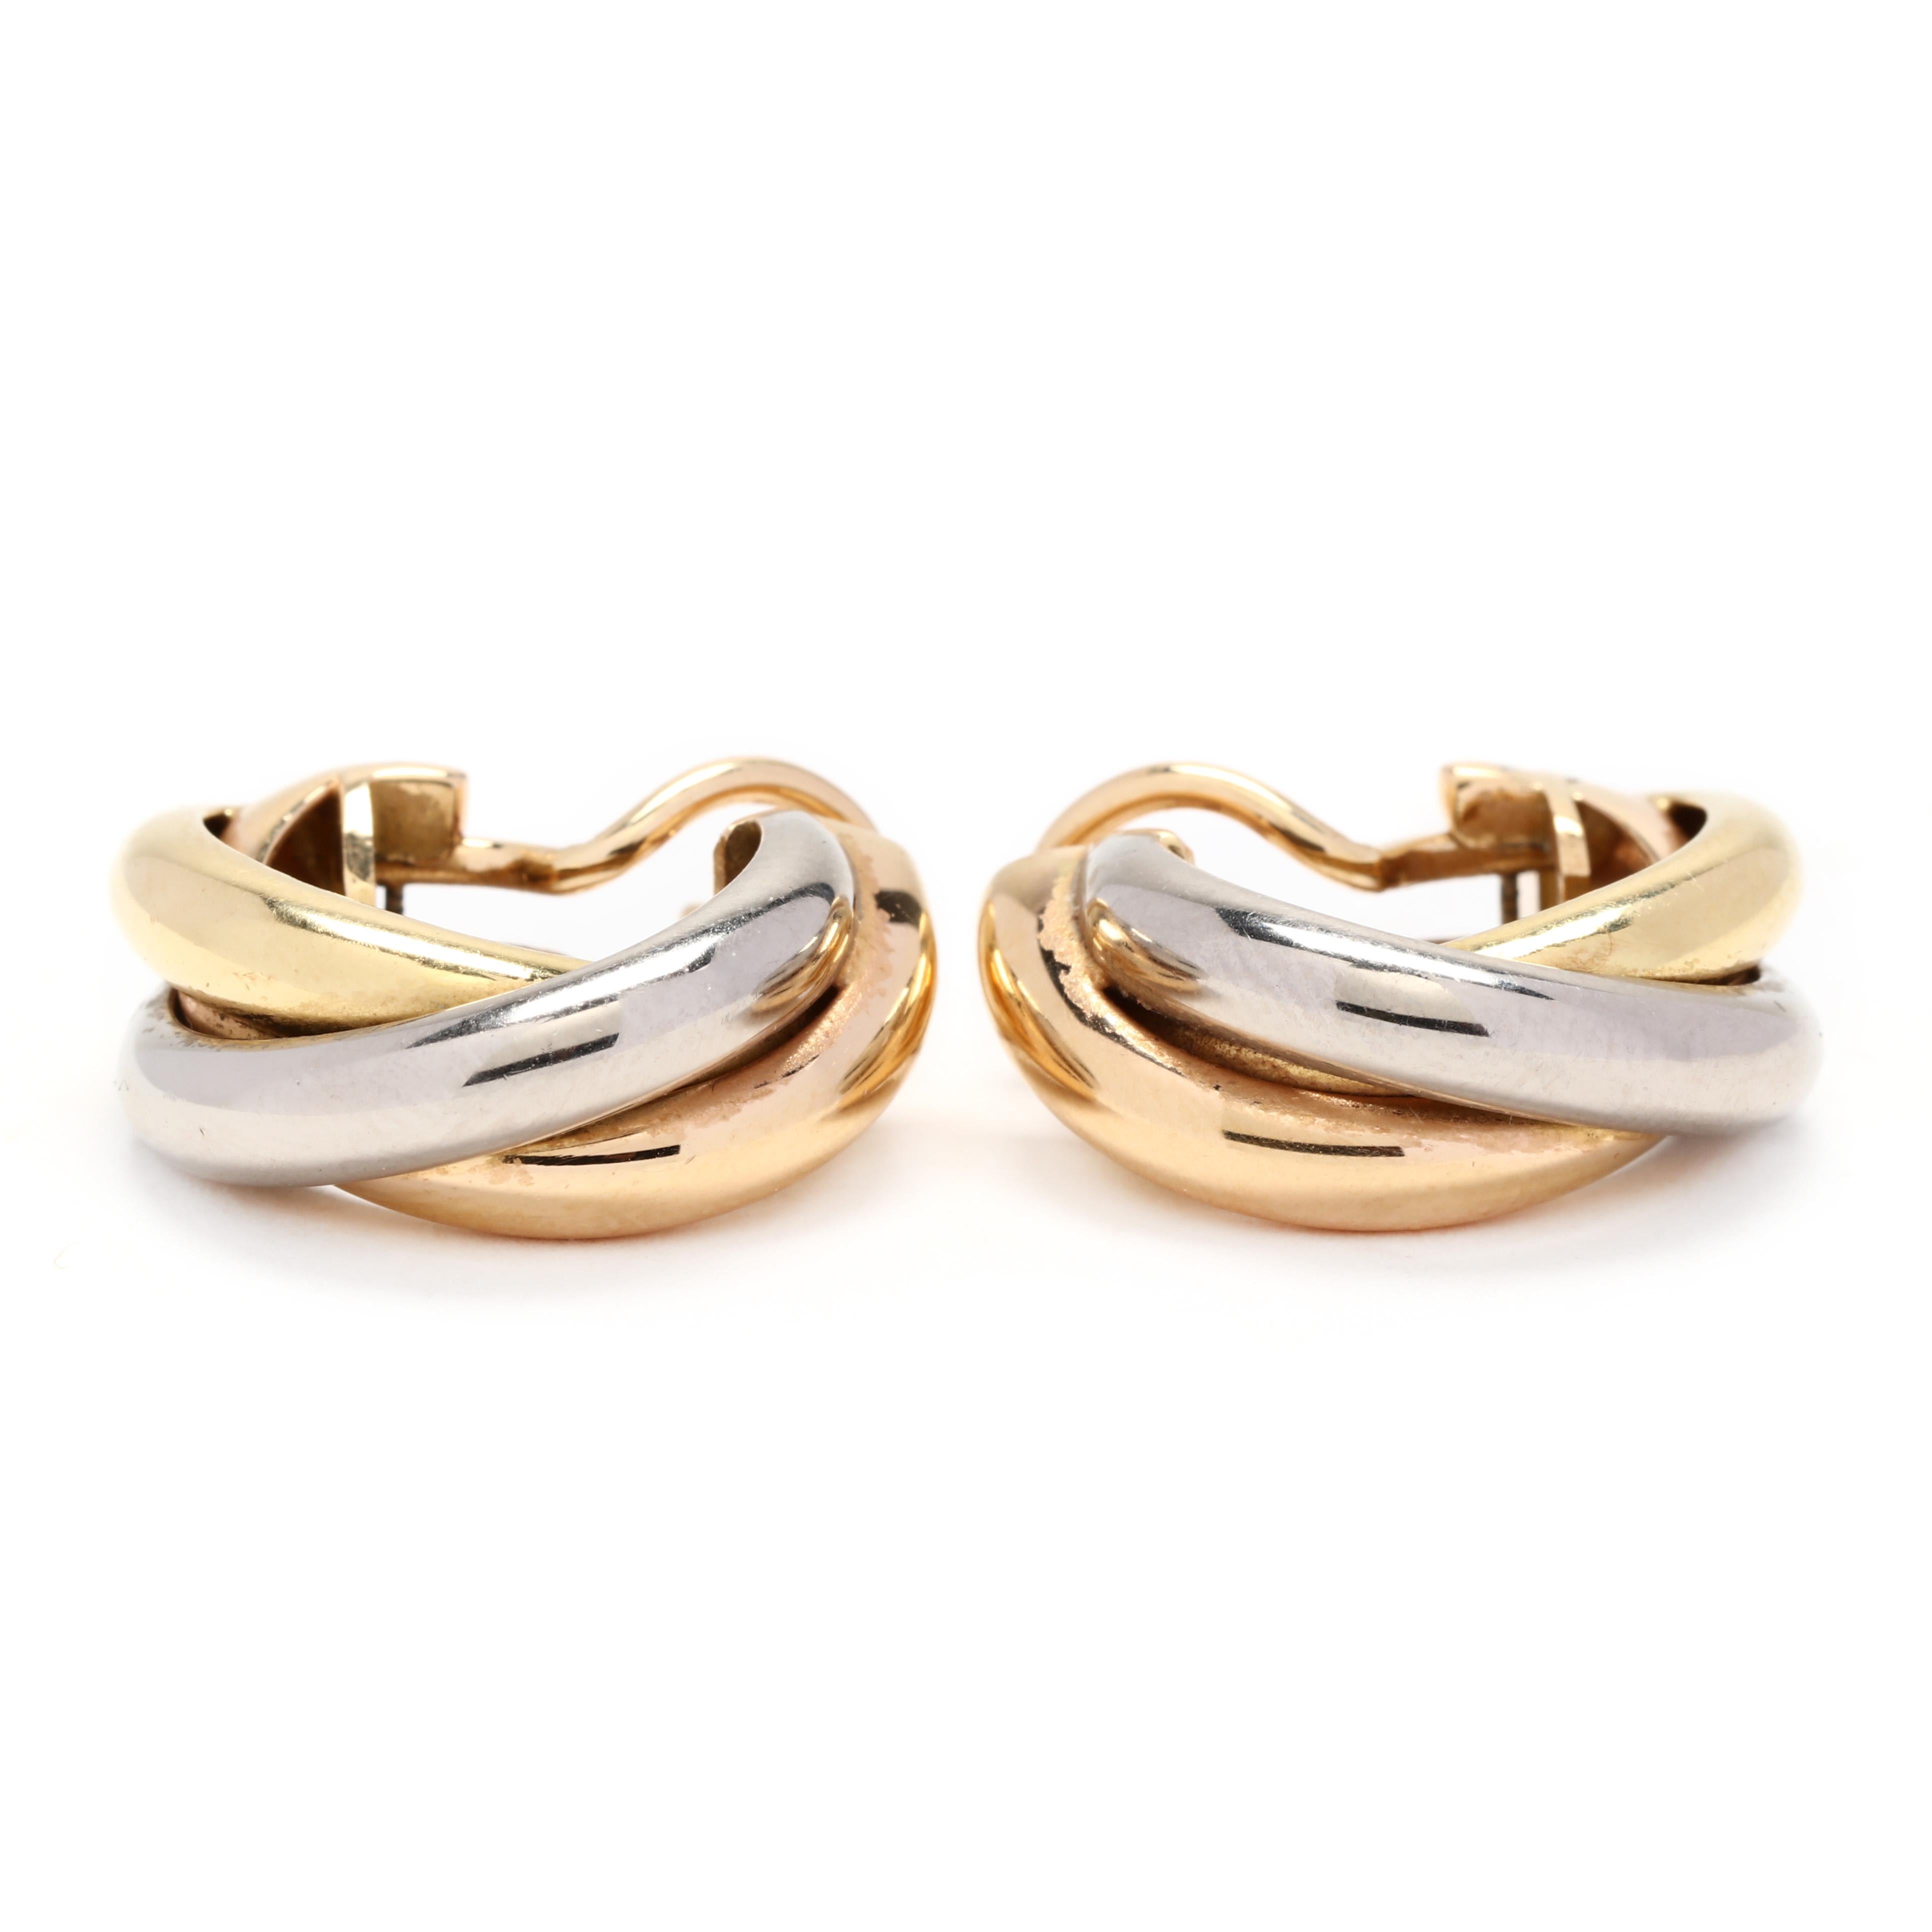 18k yellow, white and rose gold Cartier hoop earrings. Classic tricolor hoops that twist by the famous jewelry house Cartier. As a shrimp style they have a post and leverback for easy on and off and security. A timeless addition to any